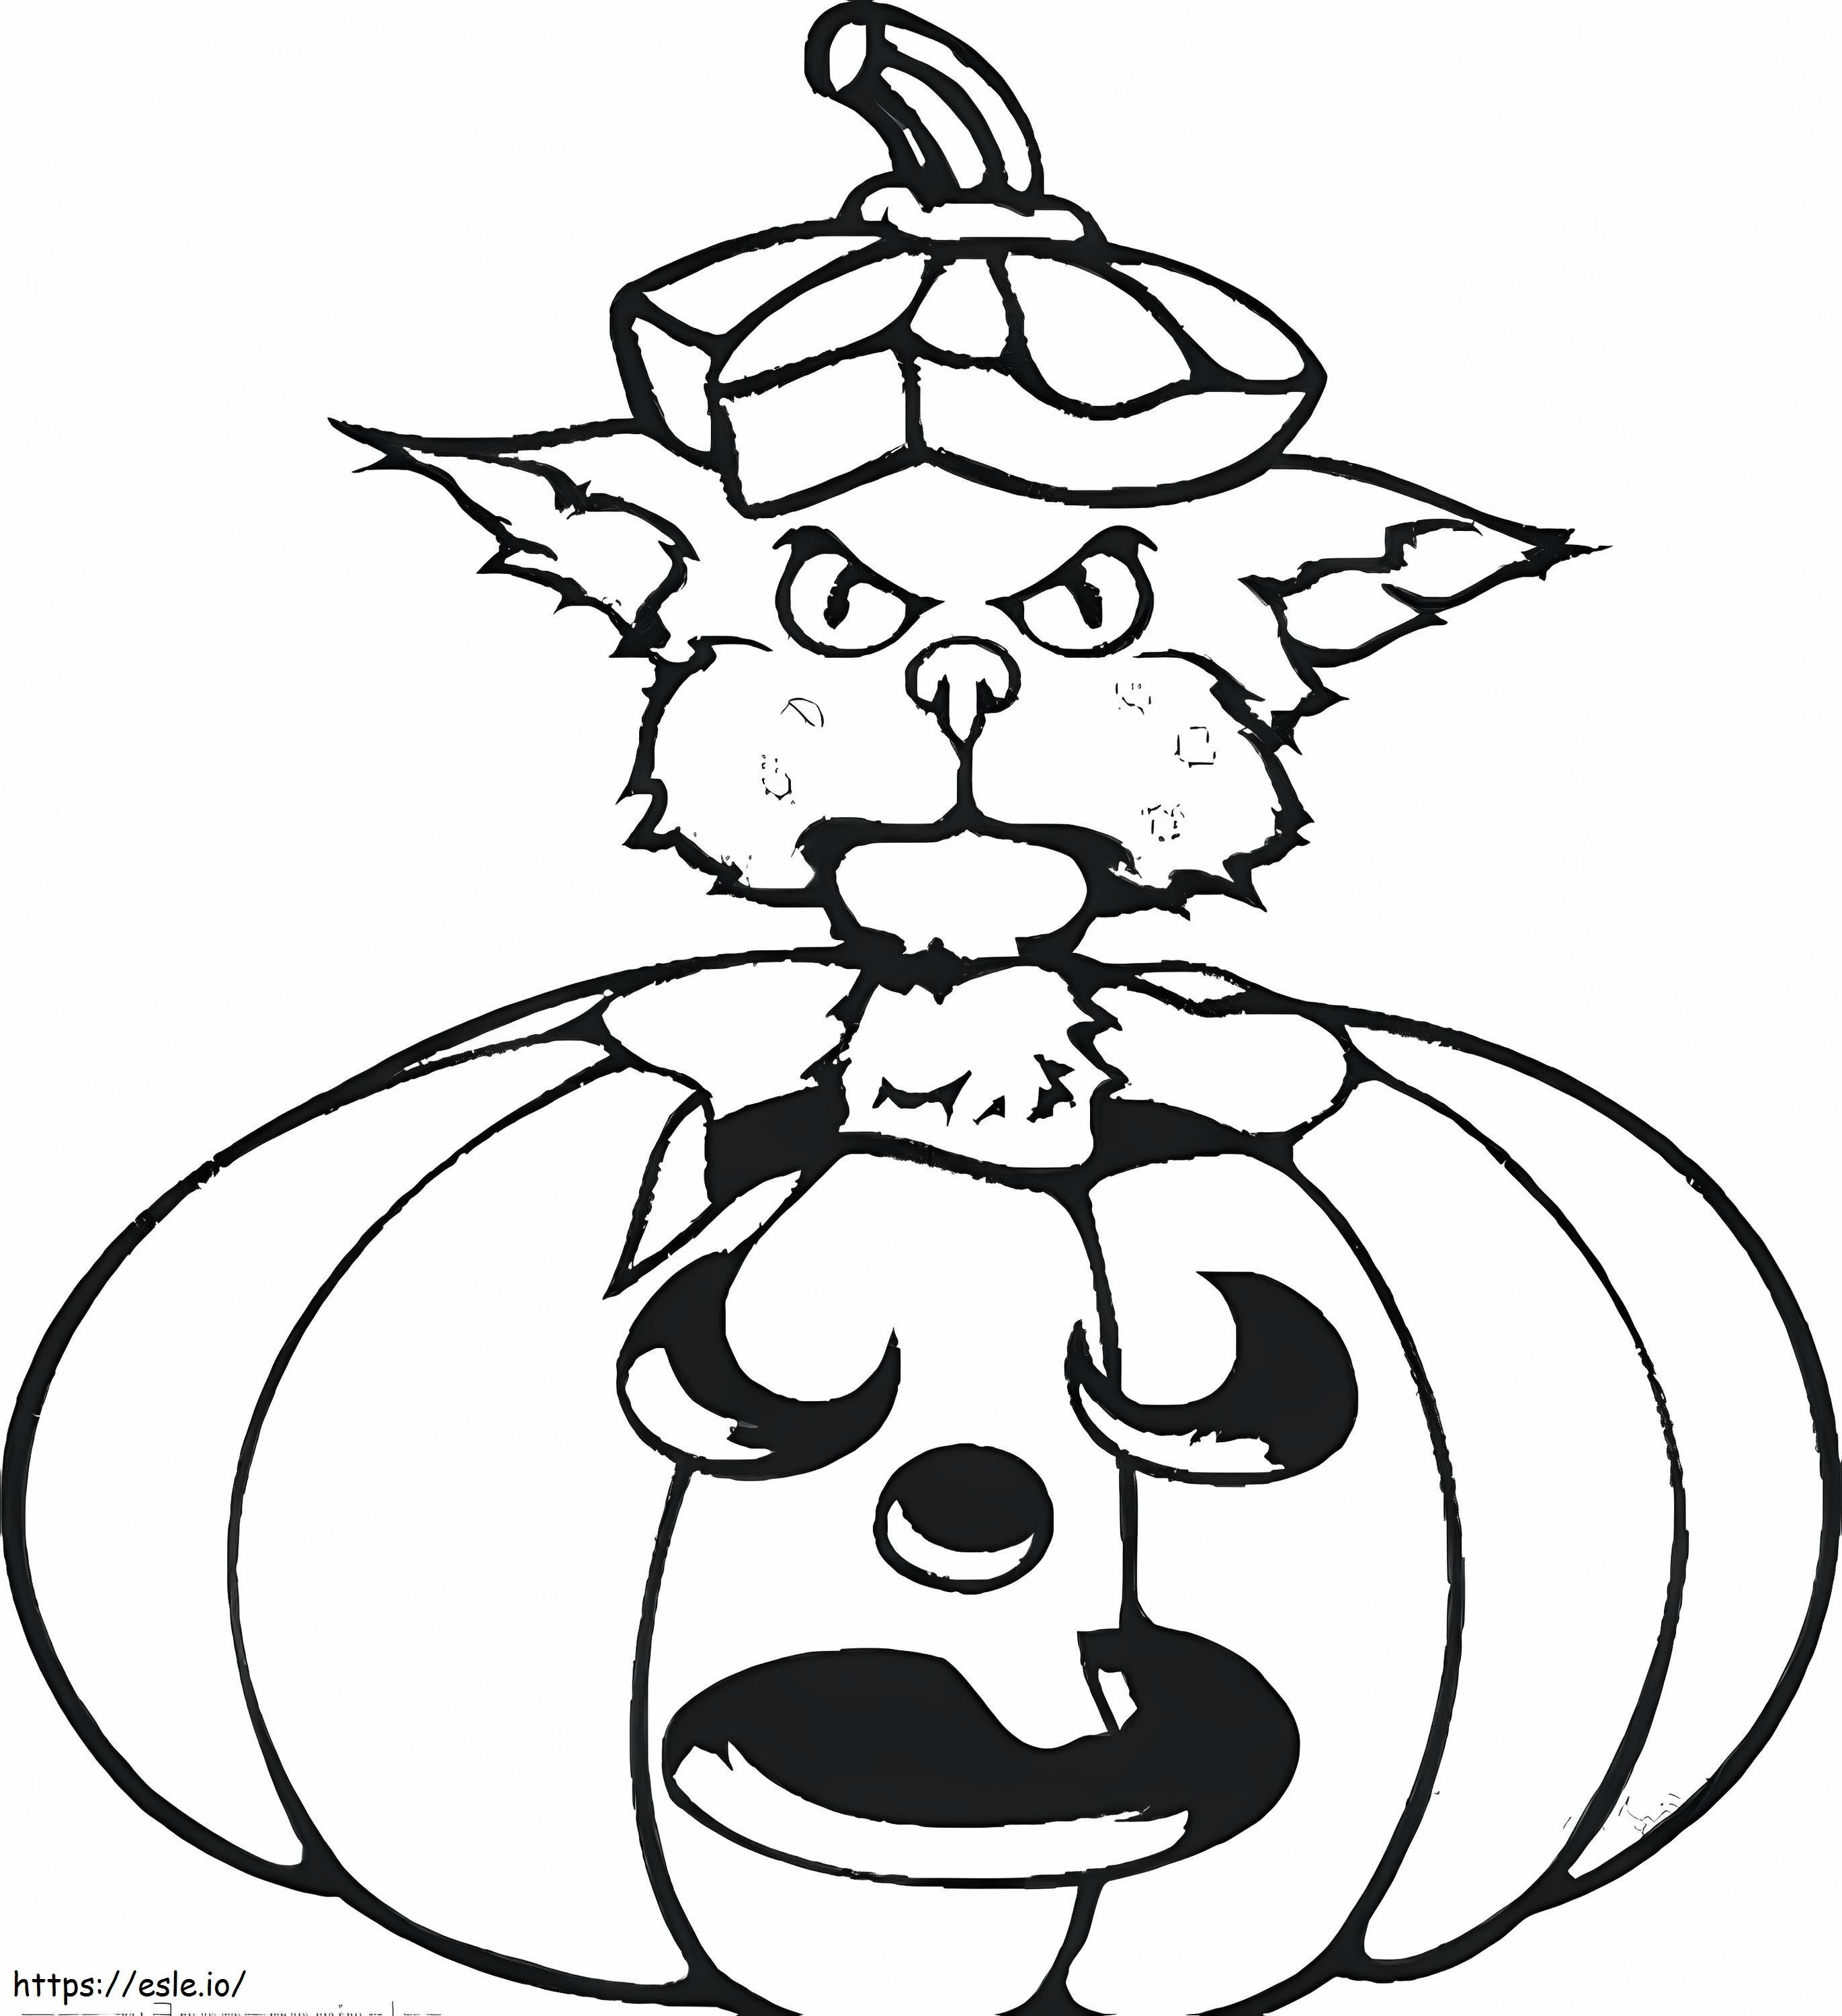 Halloween Black Cat coloring page